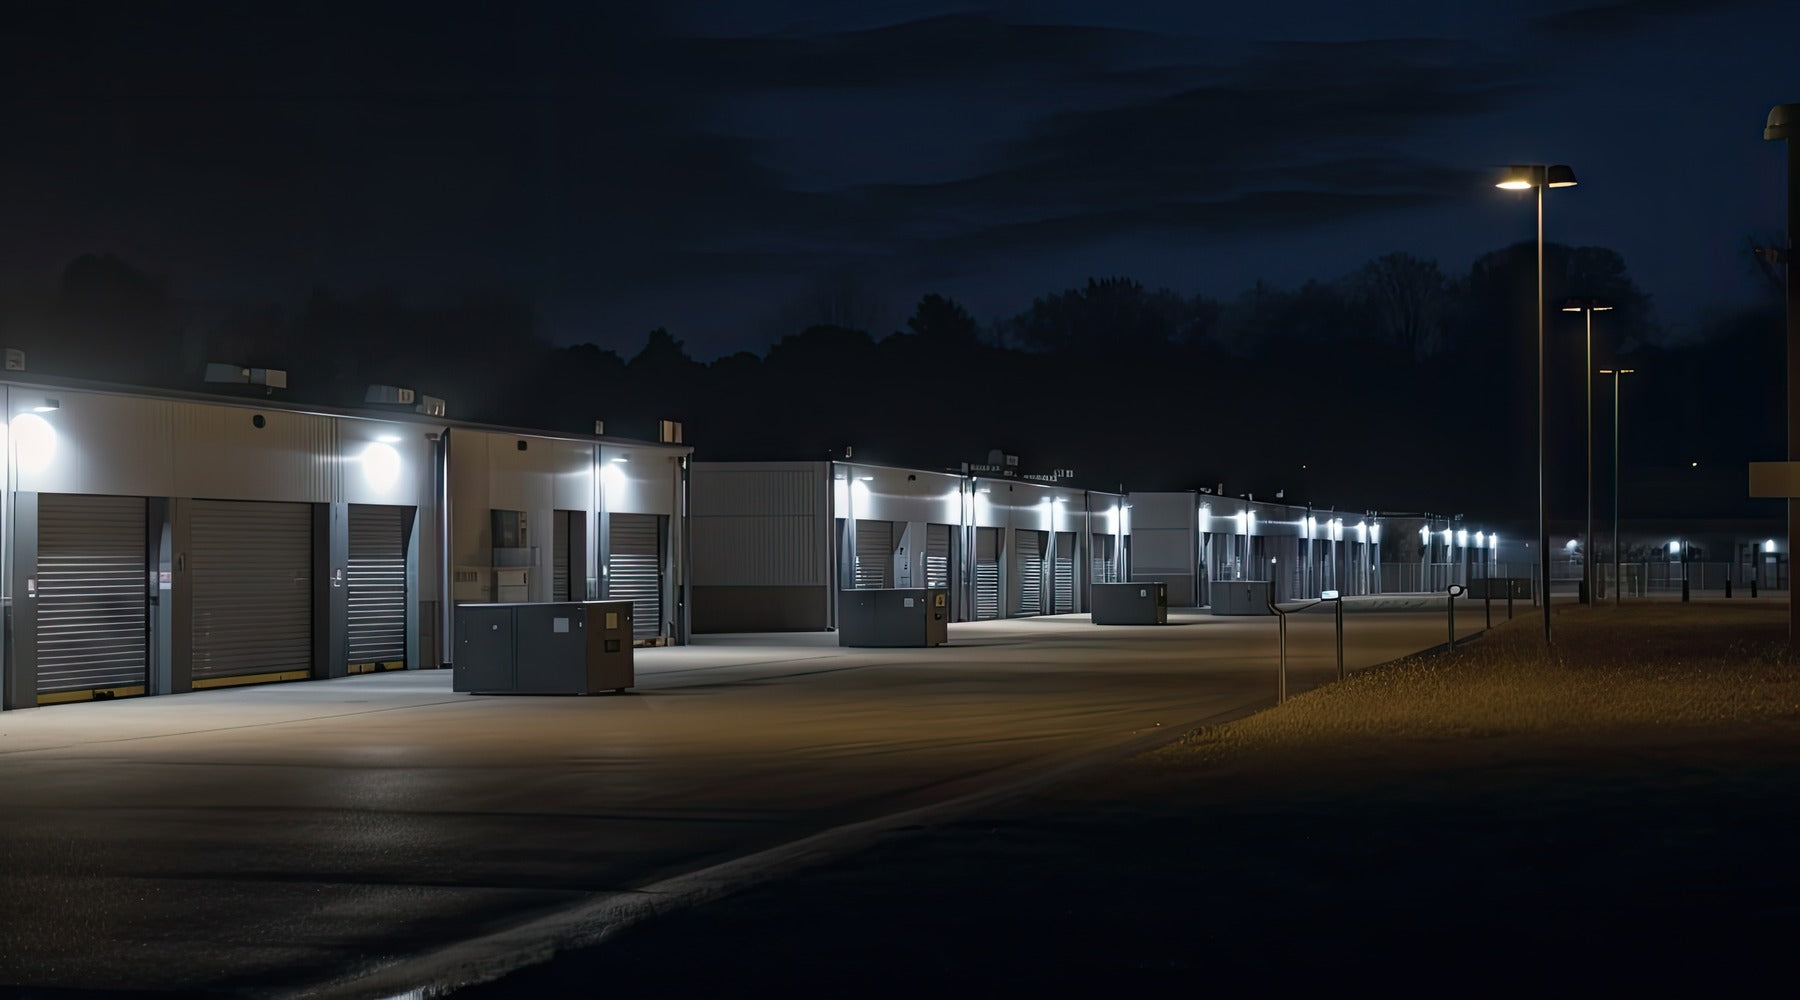 Nighttime view of flood lights illuminating the perimeter of a storage facility